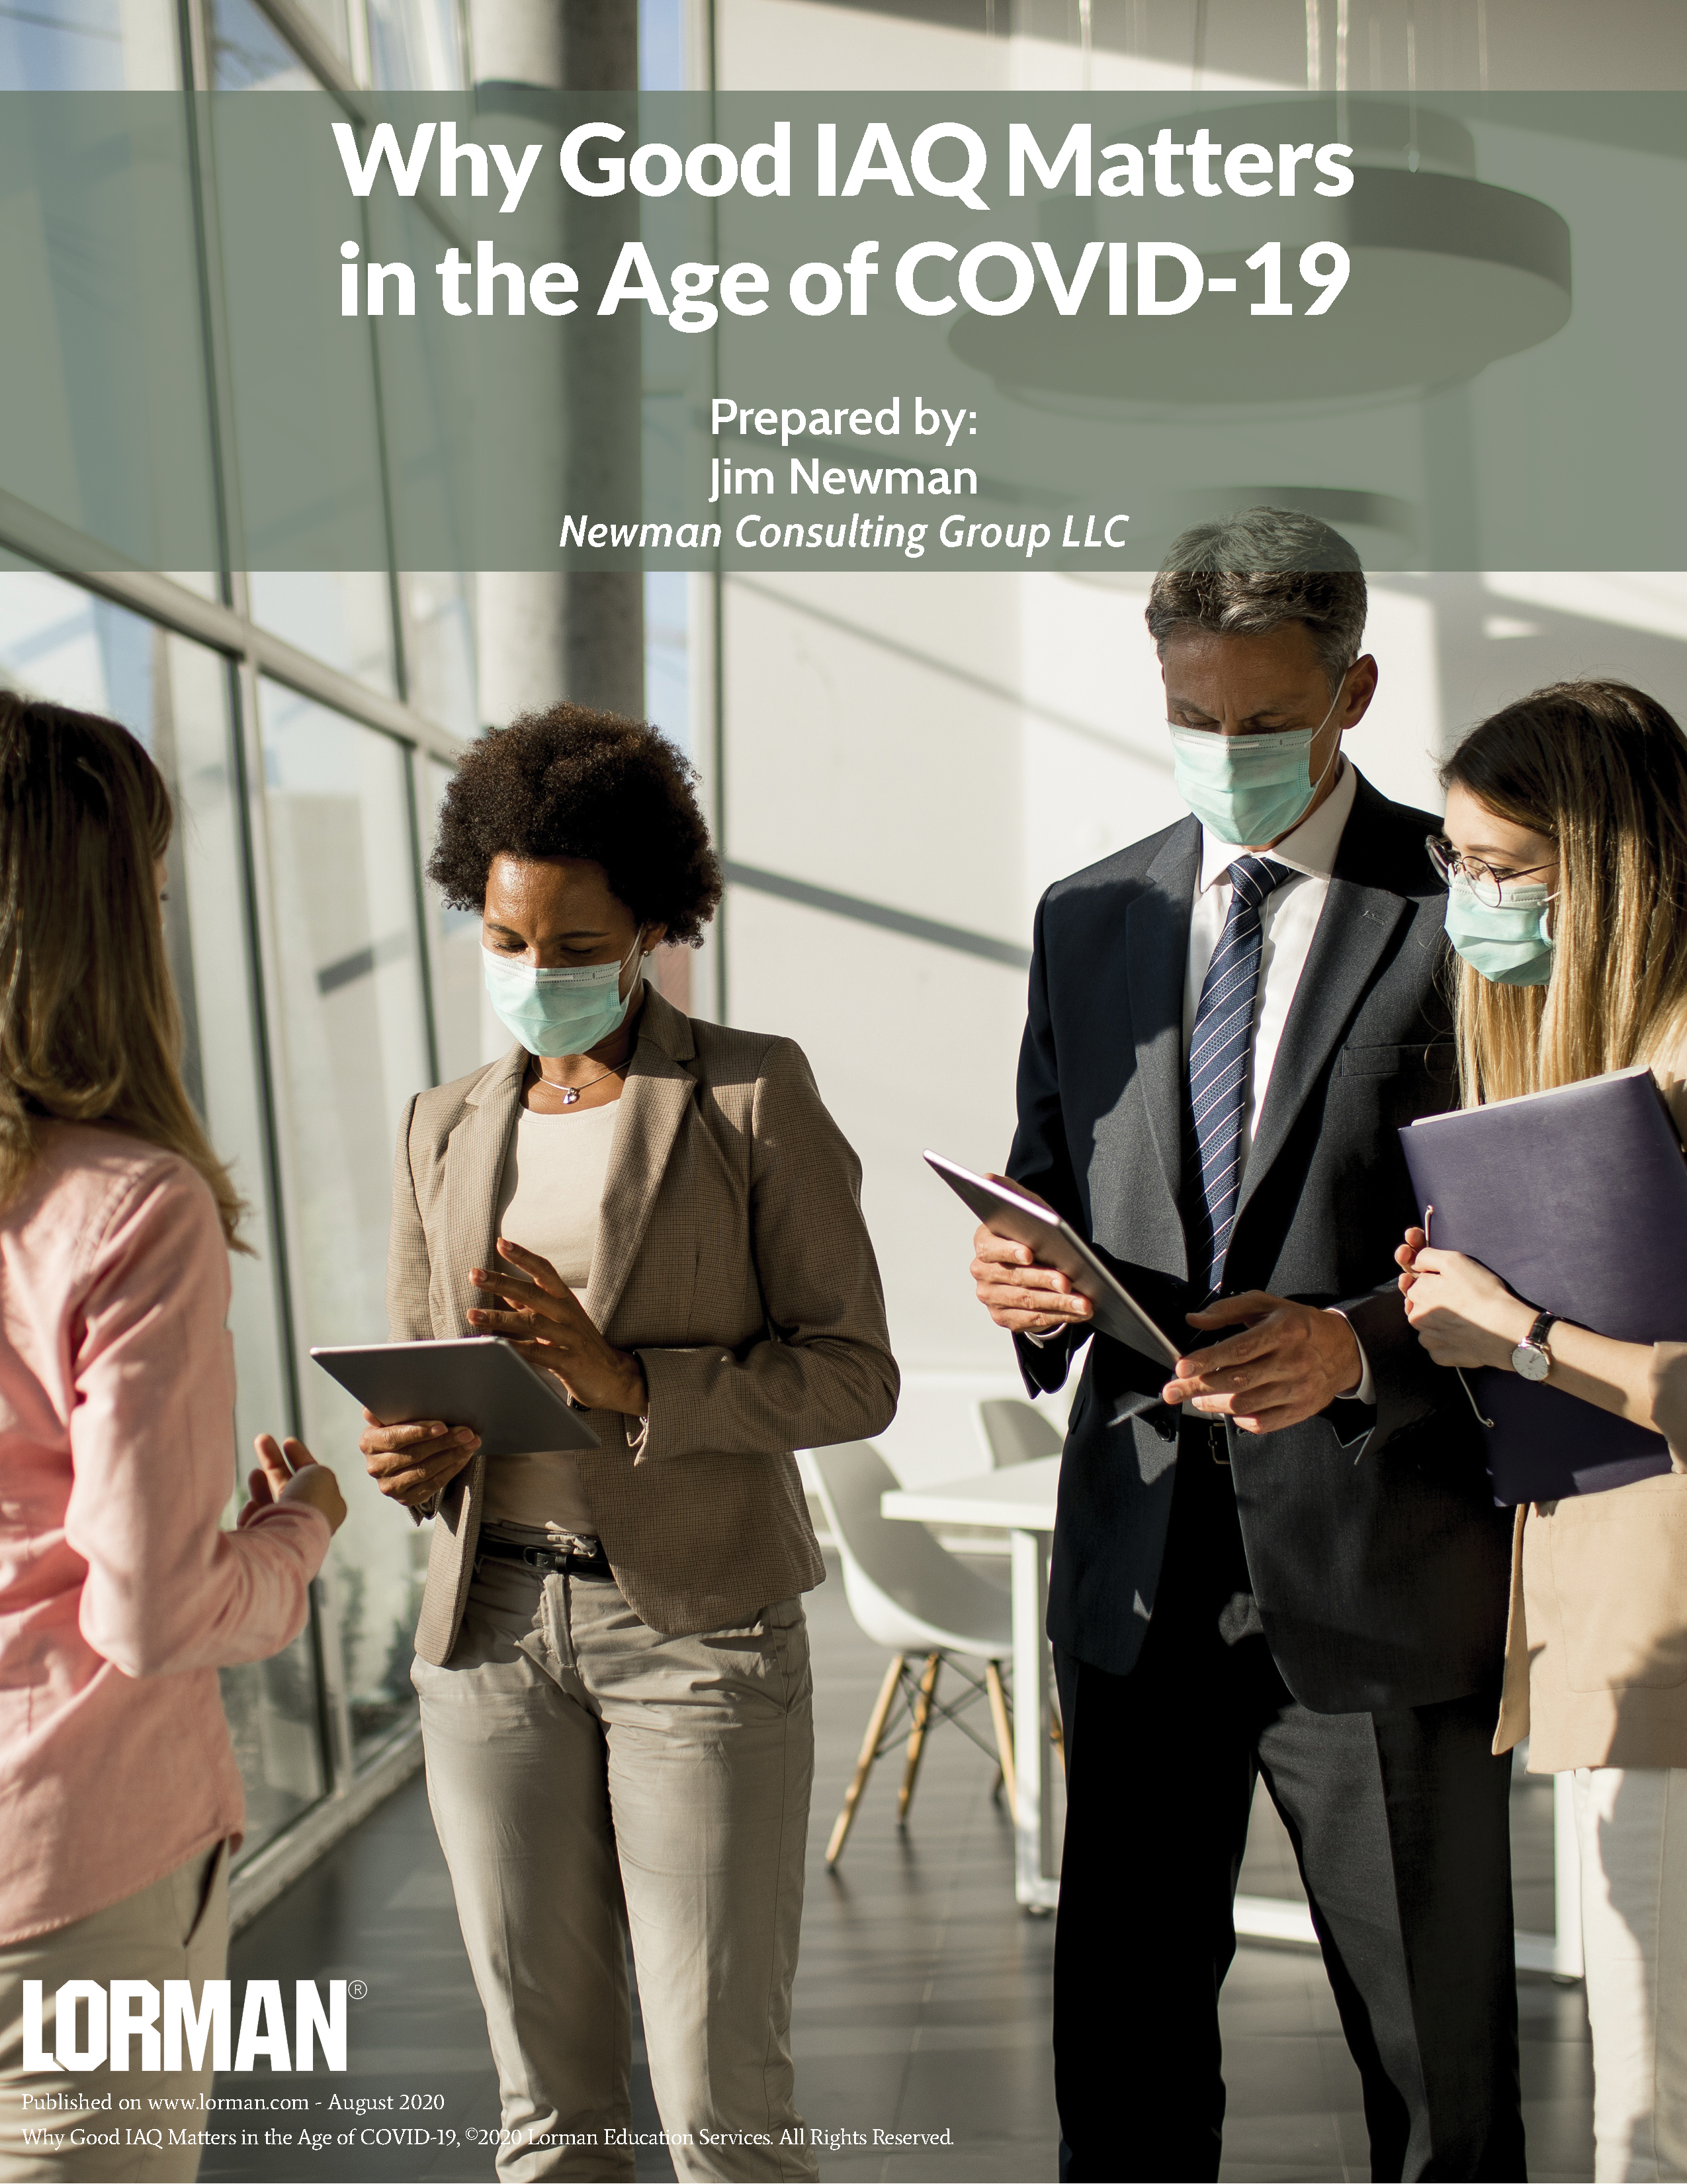 Why Good IAQ Matters in the Age of COVID-19